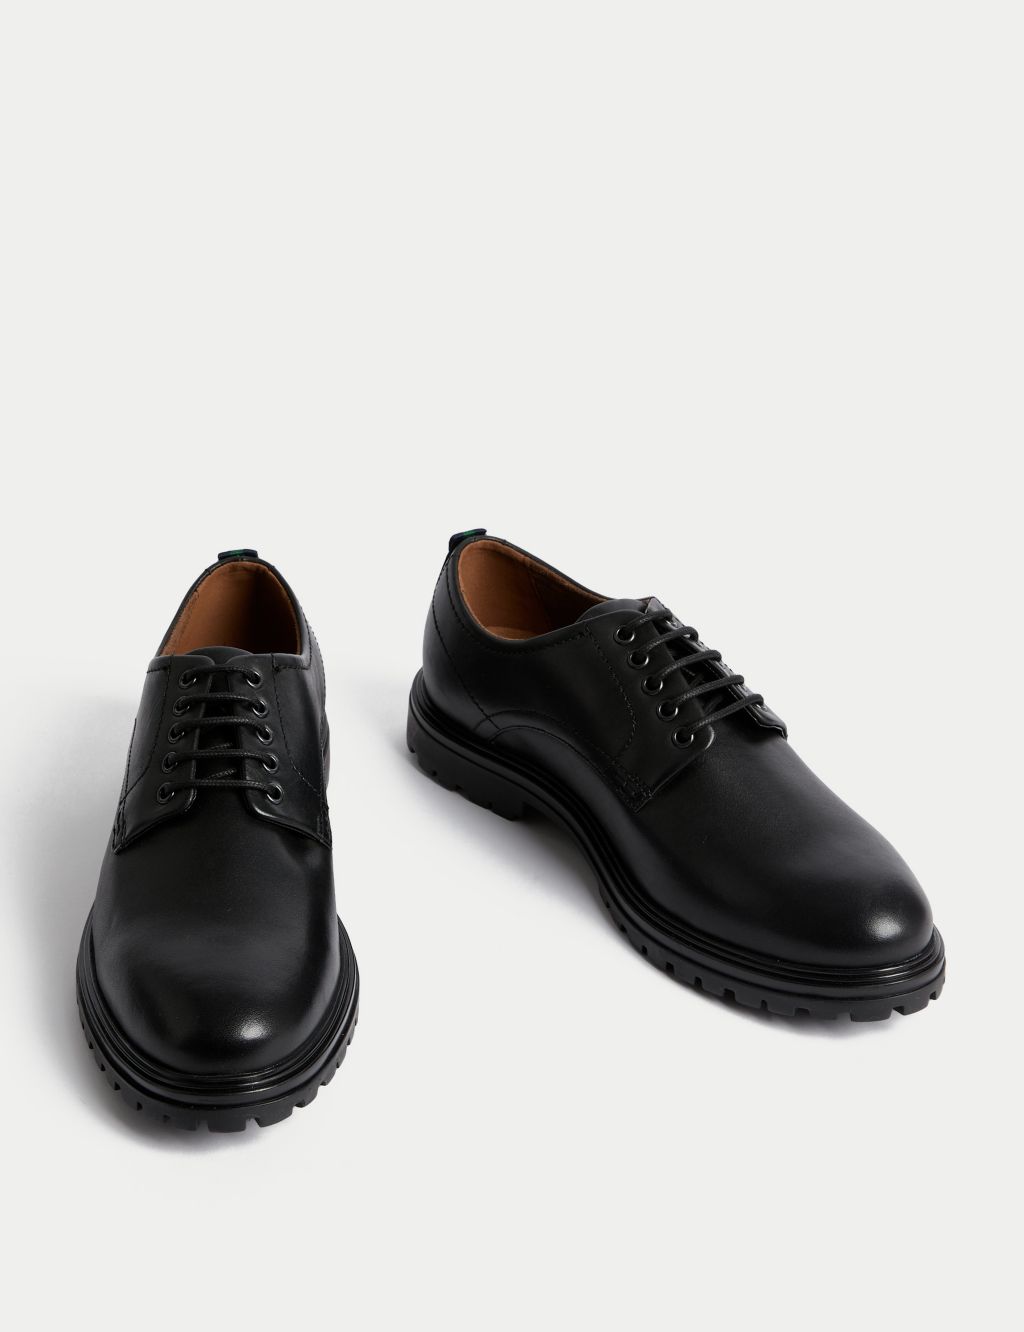 Leather Derby Heritage Shoes image 2